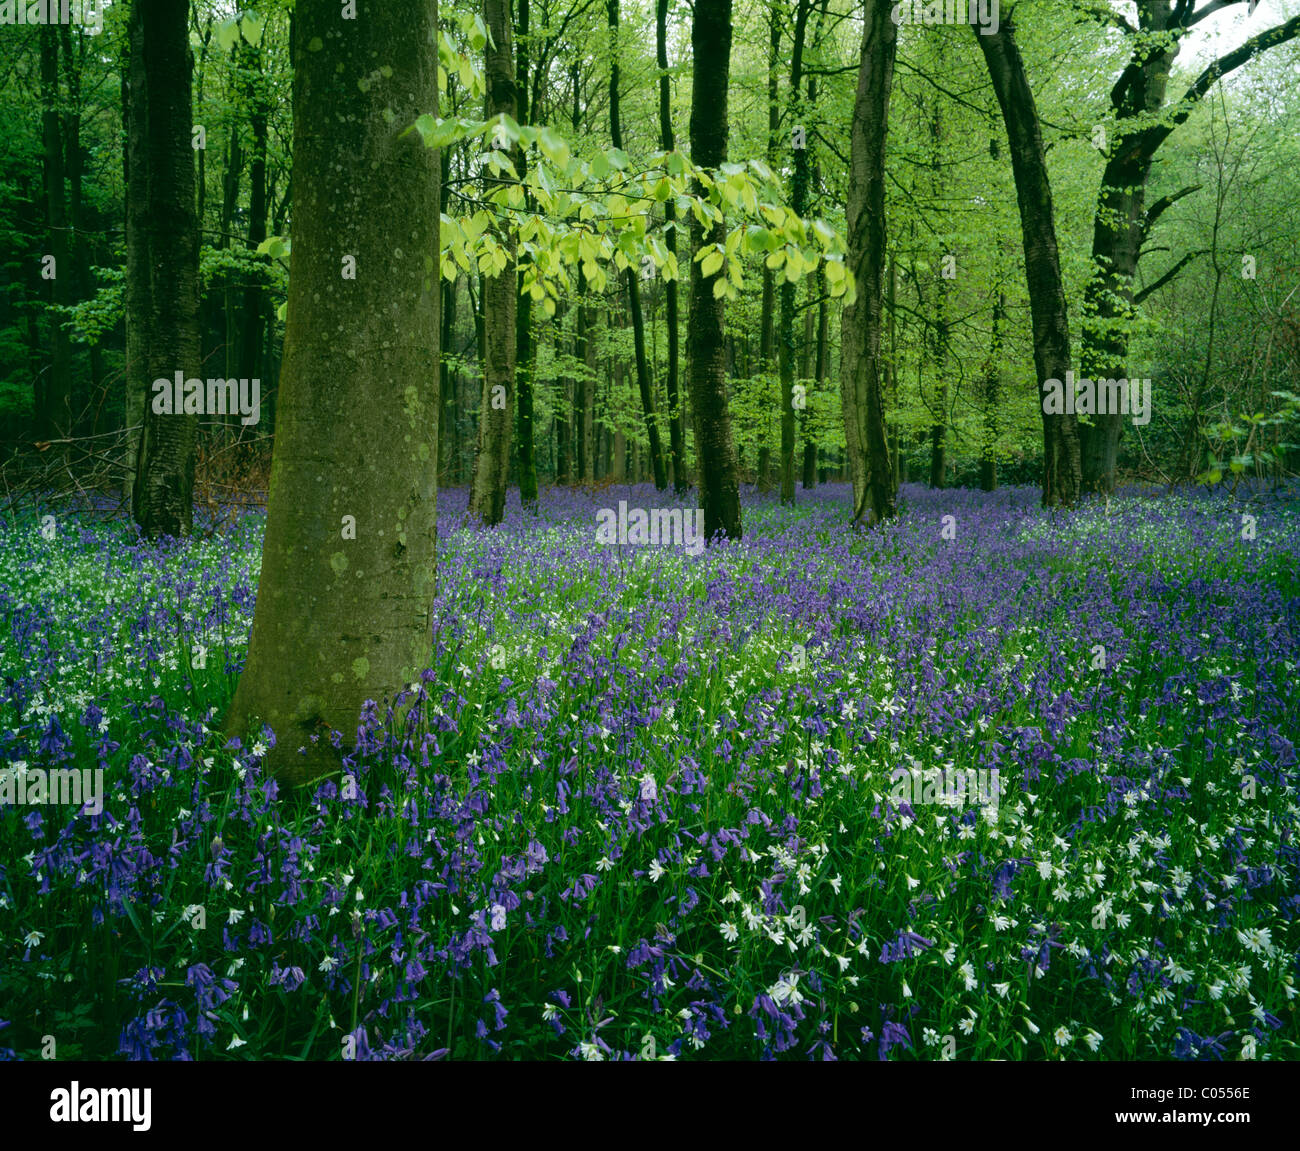 Bluebells (hyacinthoides non-scripta) growing amongst greater stitchwort (stellaria holostea) in a woodland in Wiltshire, UK. Stock Photo